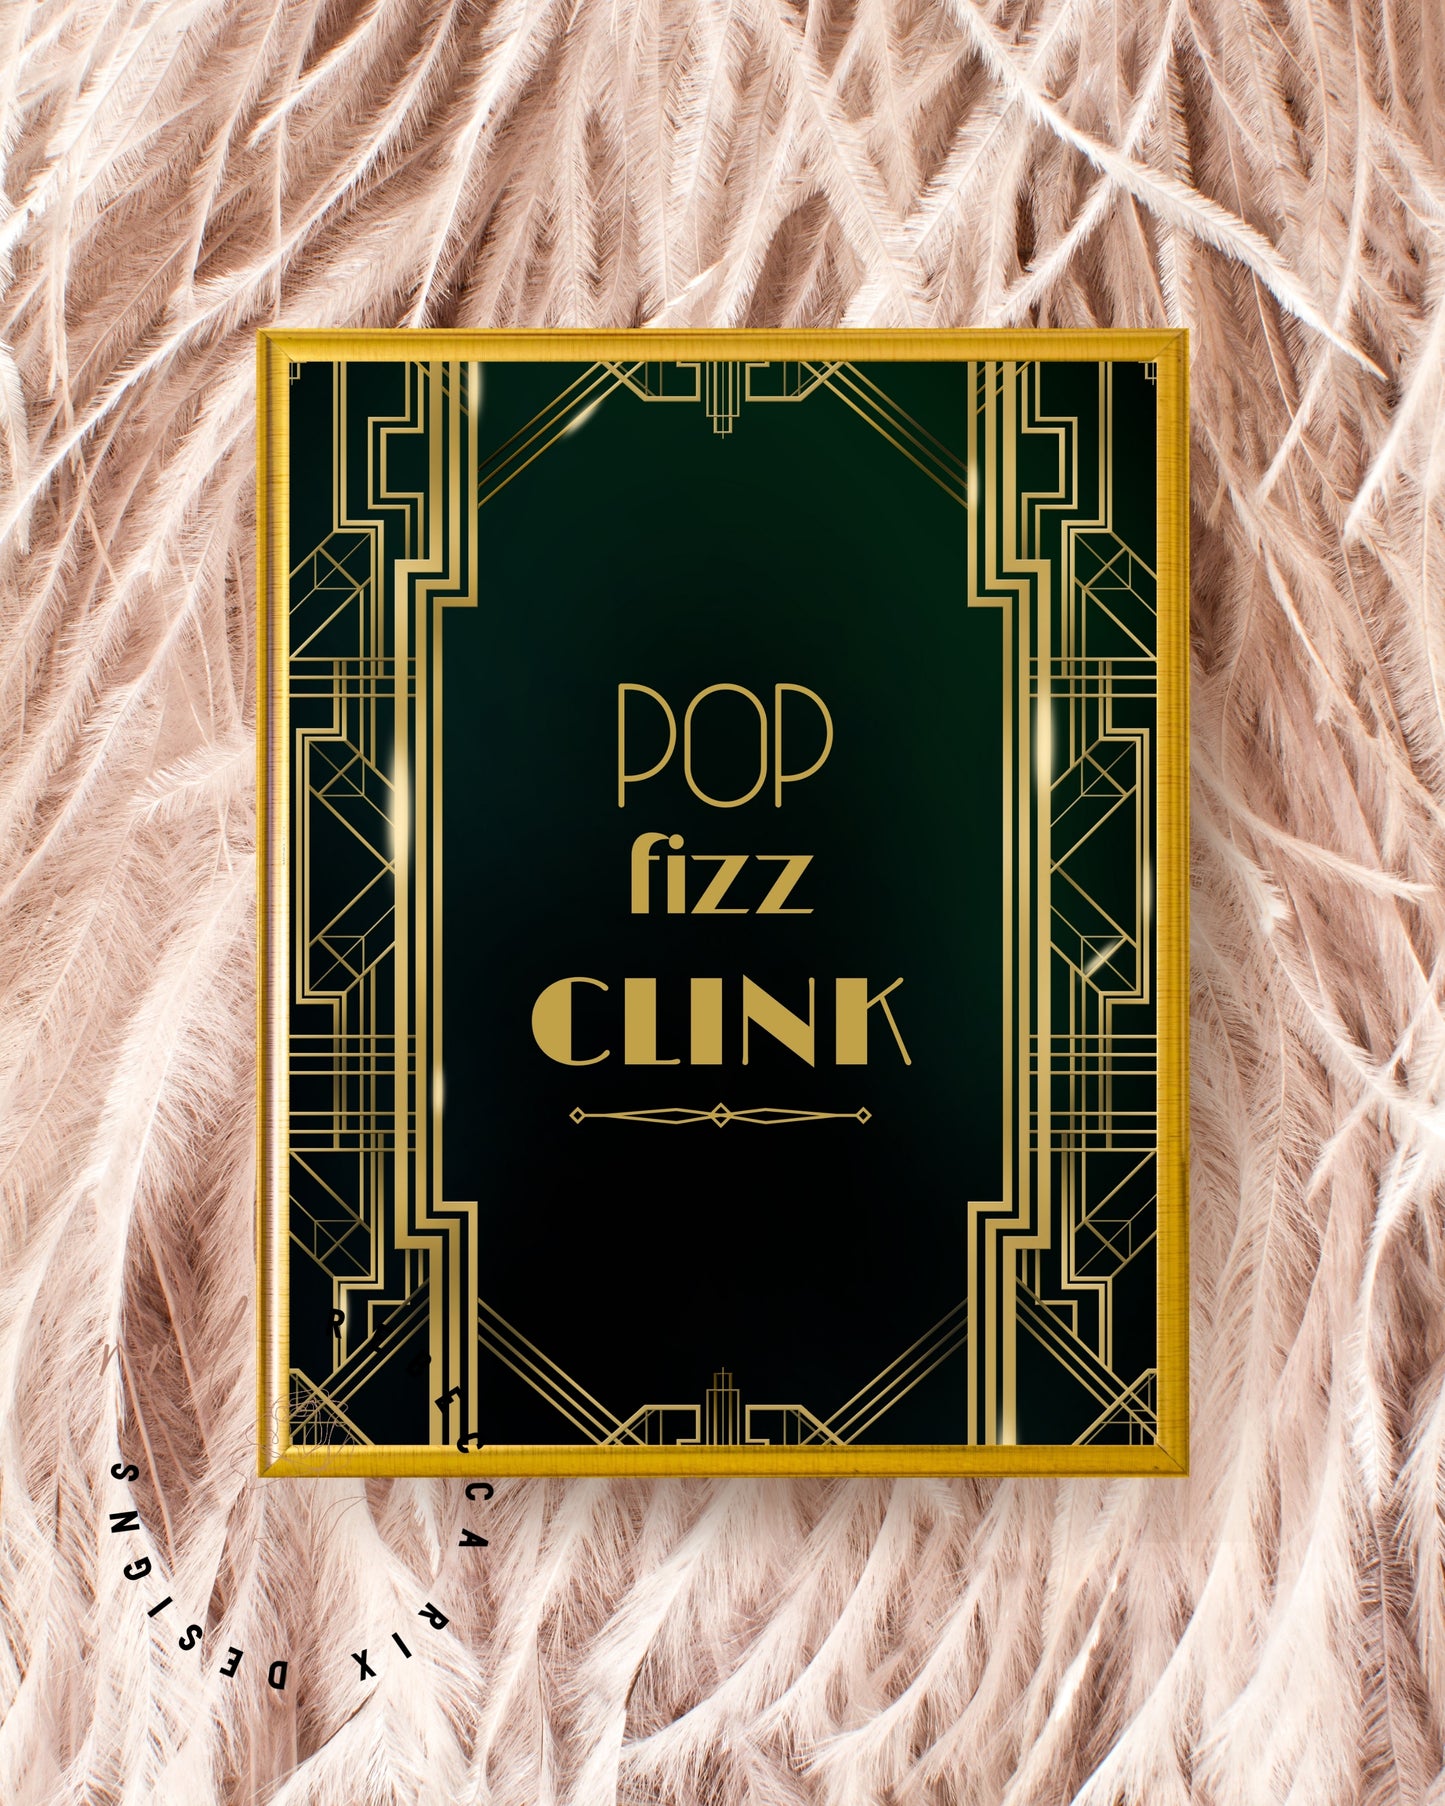 "Pop Fizz Clink" Art Deco Printable Party Sign For Great Gatsby or Roaring 20's Party Or Wedding, Black & Gold, Printable Party Decor